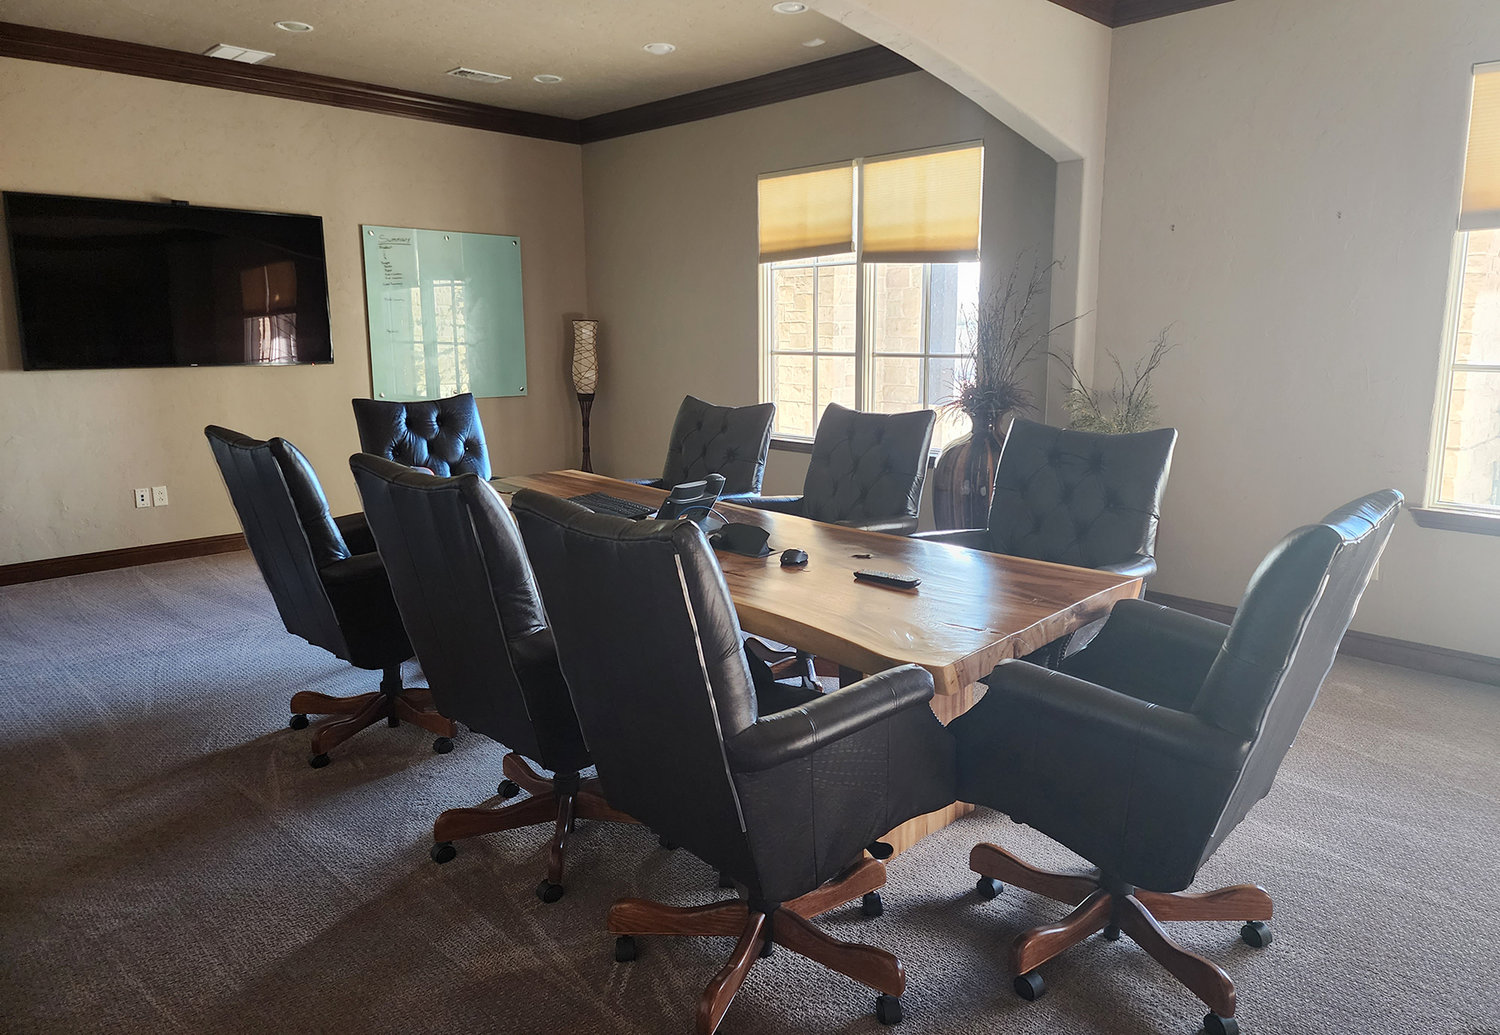 A meeting room in the new Willow Park City Hall; city officials plan to make the move into the Mercer Building in early 2023.